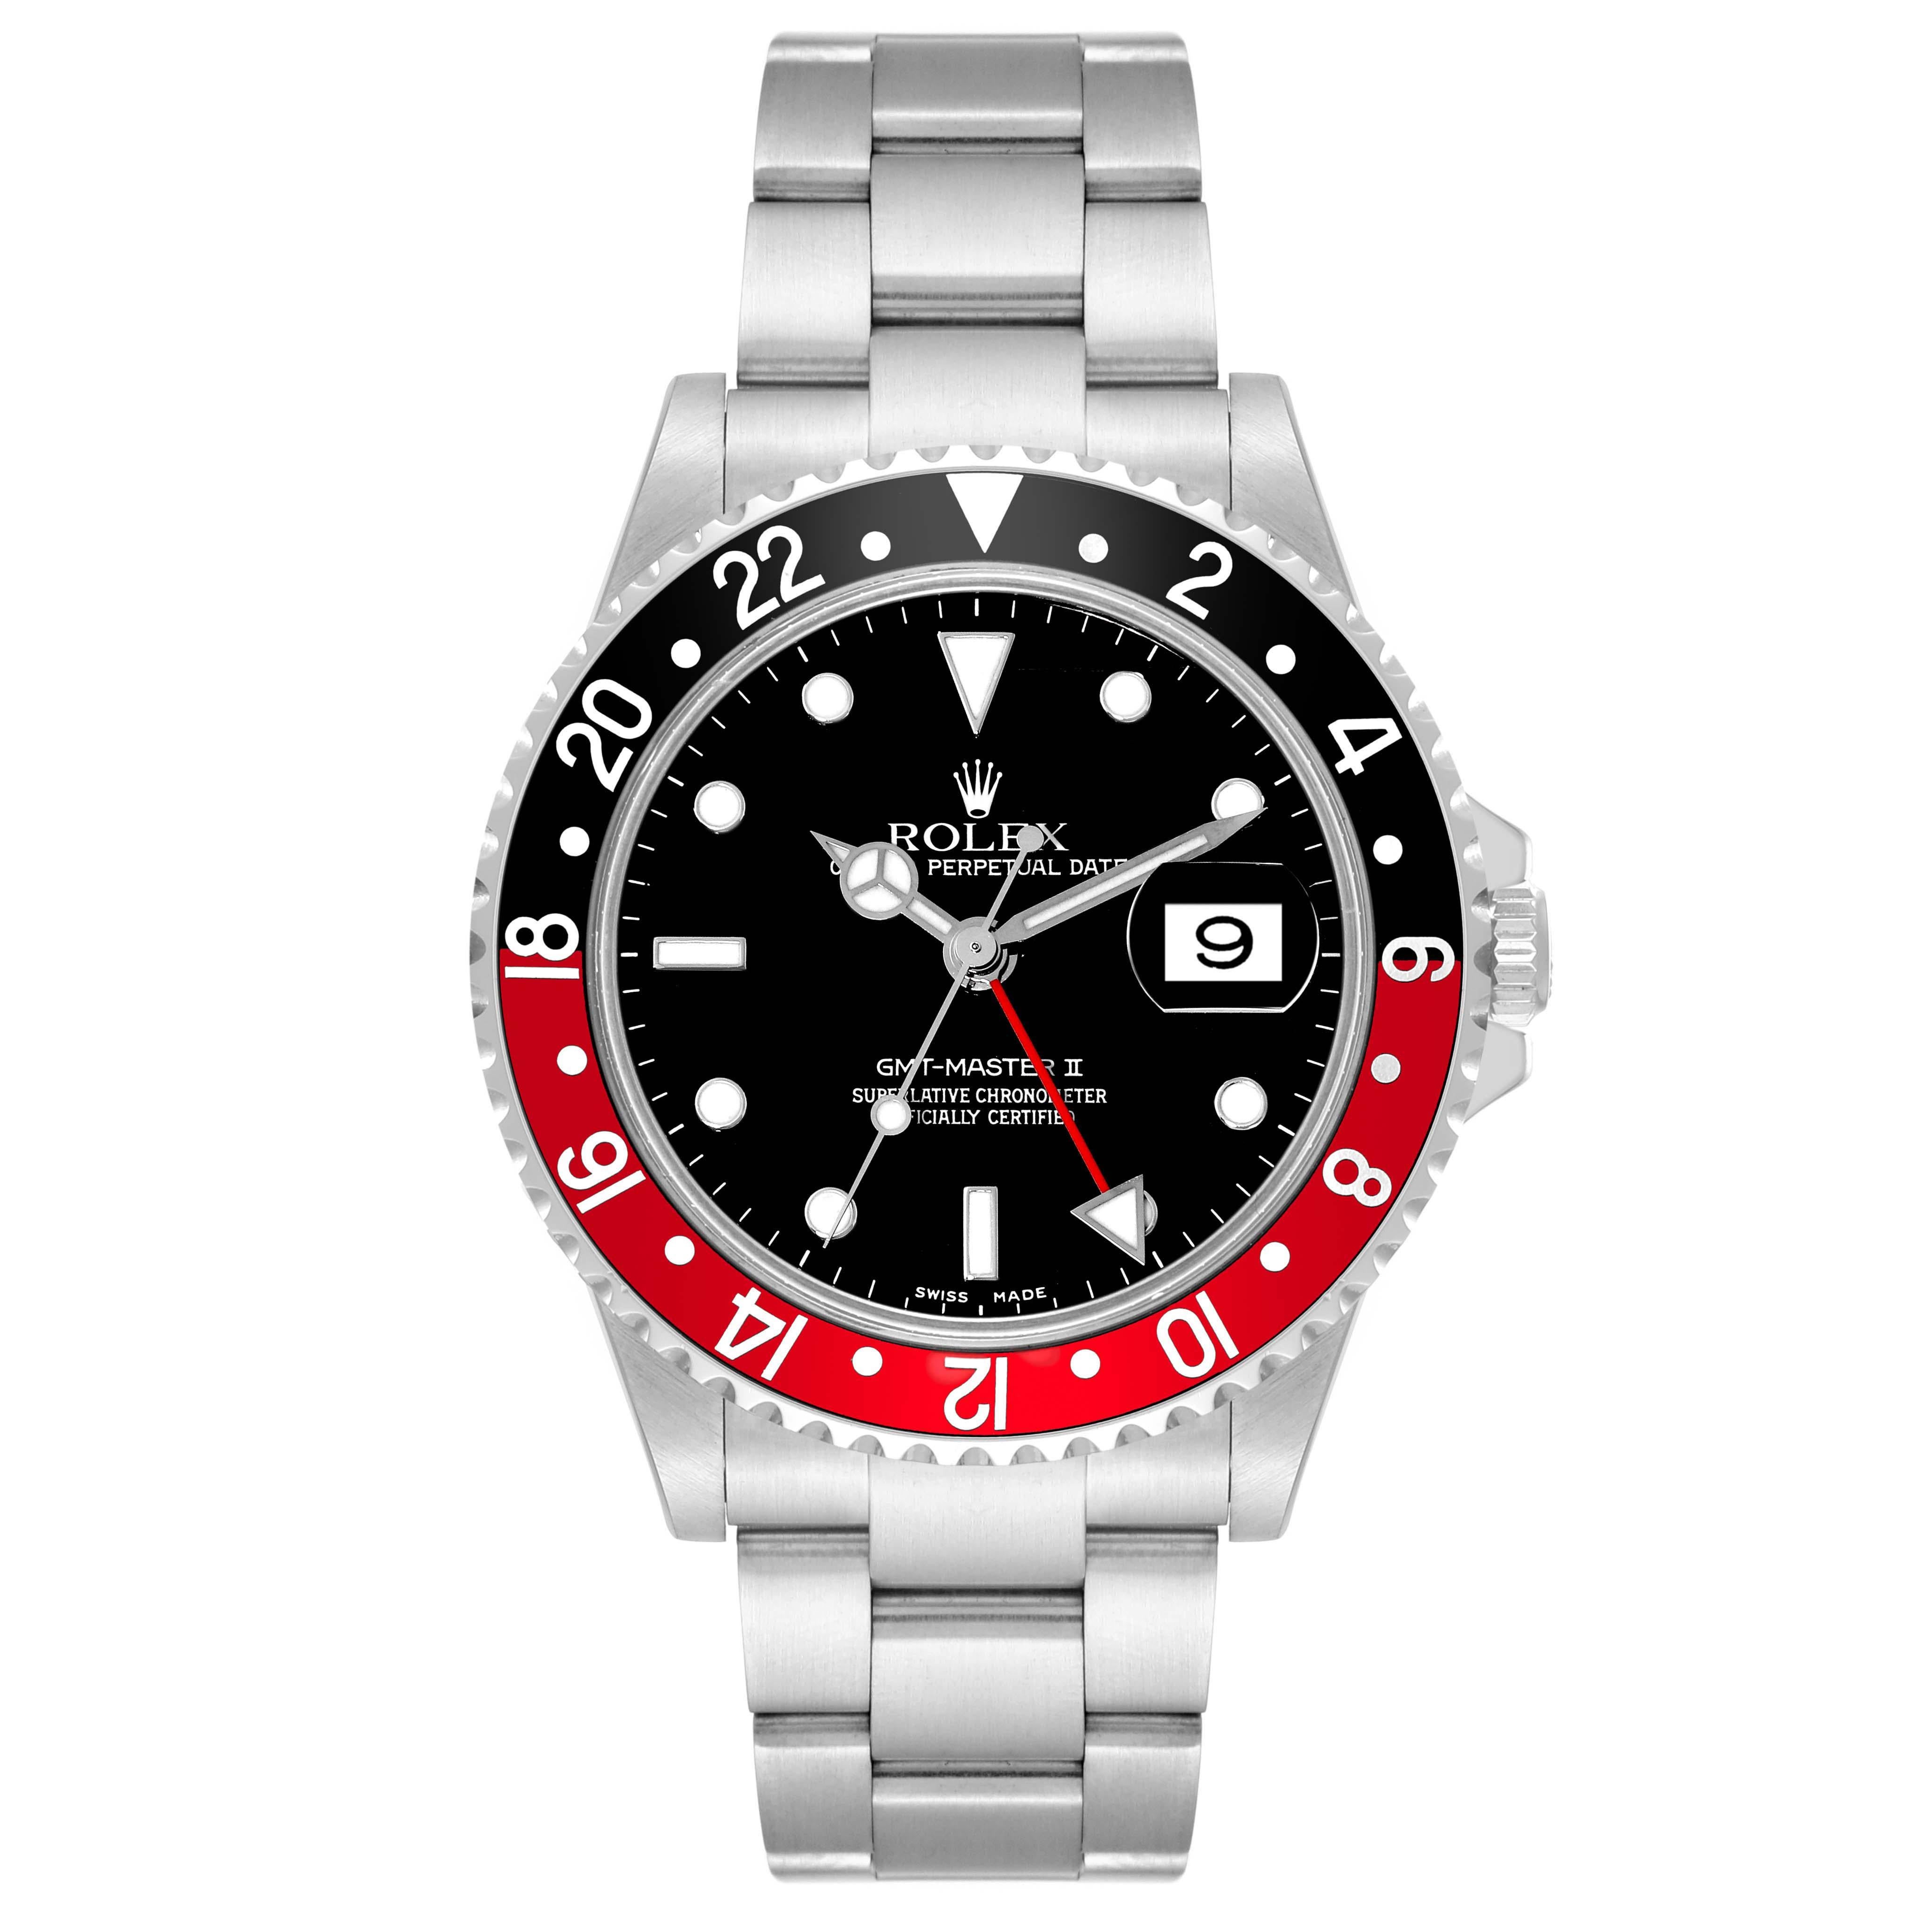 Rolex GMT Master II Black Red Coke Bezel Steel Mens Watch 16710 Box Papers. Officially certified chronometer automatic self-winding movement. Stainless steel case 40 mm in diameter. Rolex logo on the crown. Stainless steel bi-directional rotating